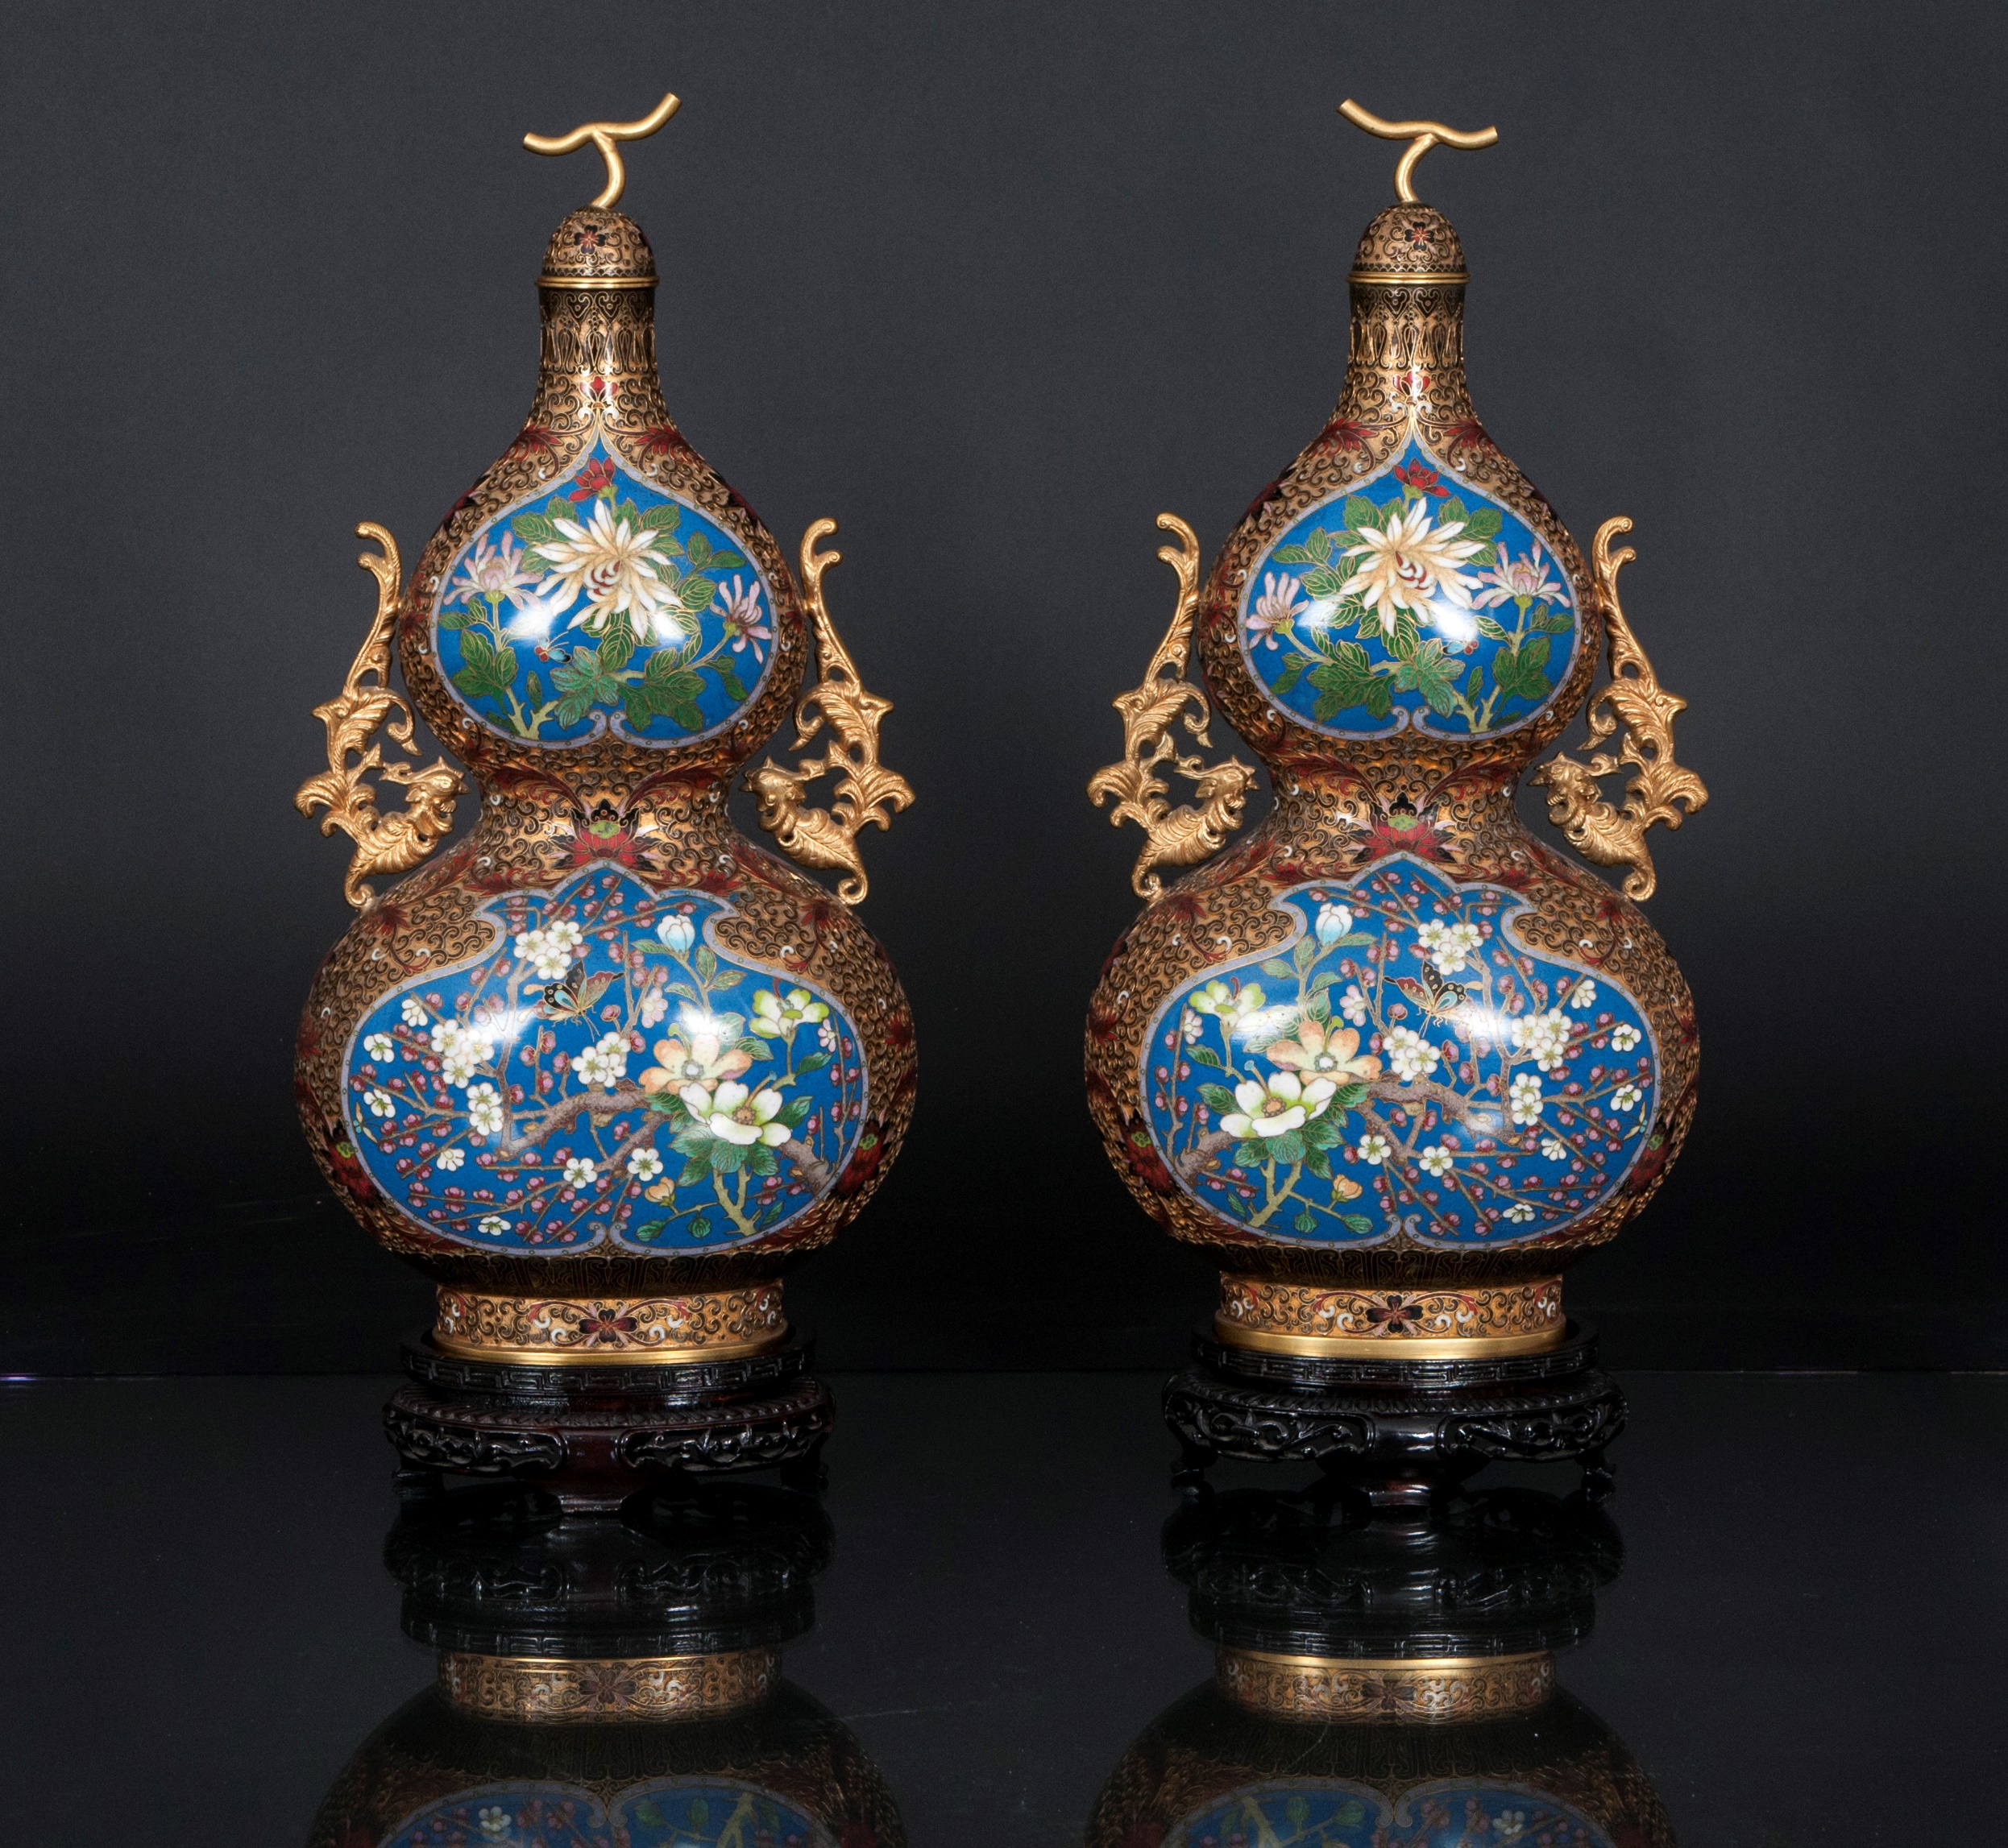 A pair of cloisonné double gourd vases and covers - image 2